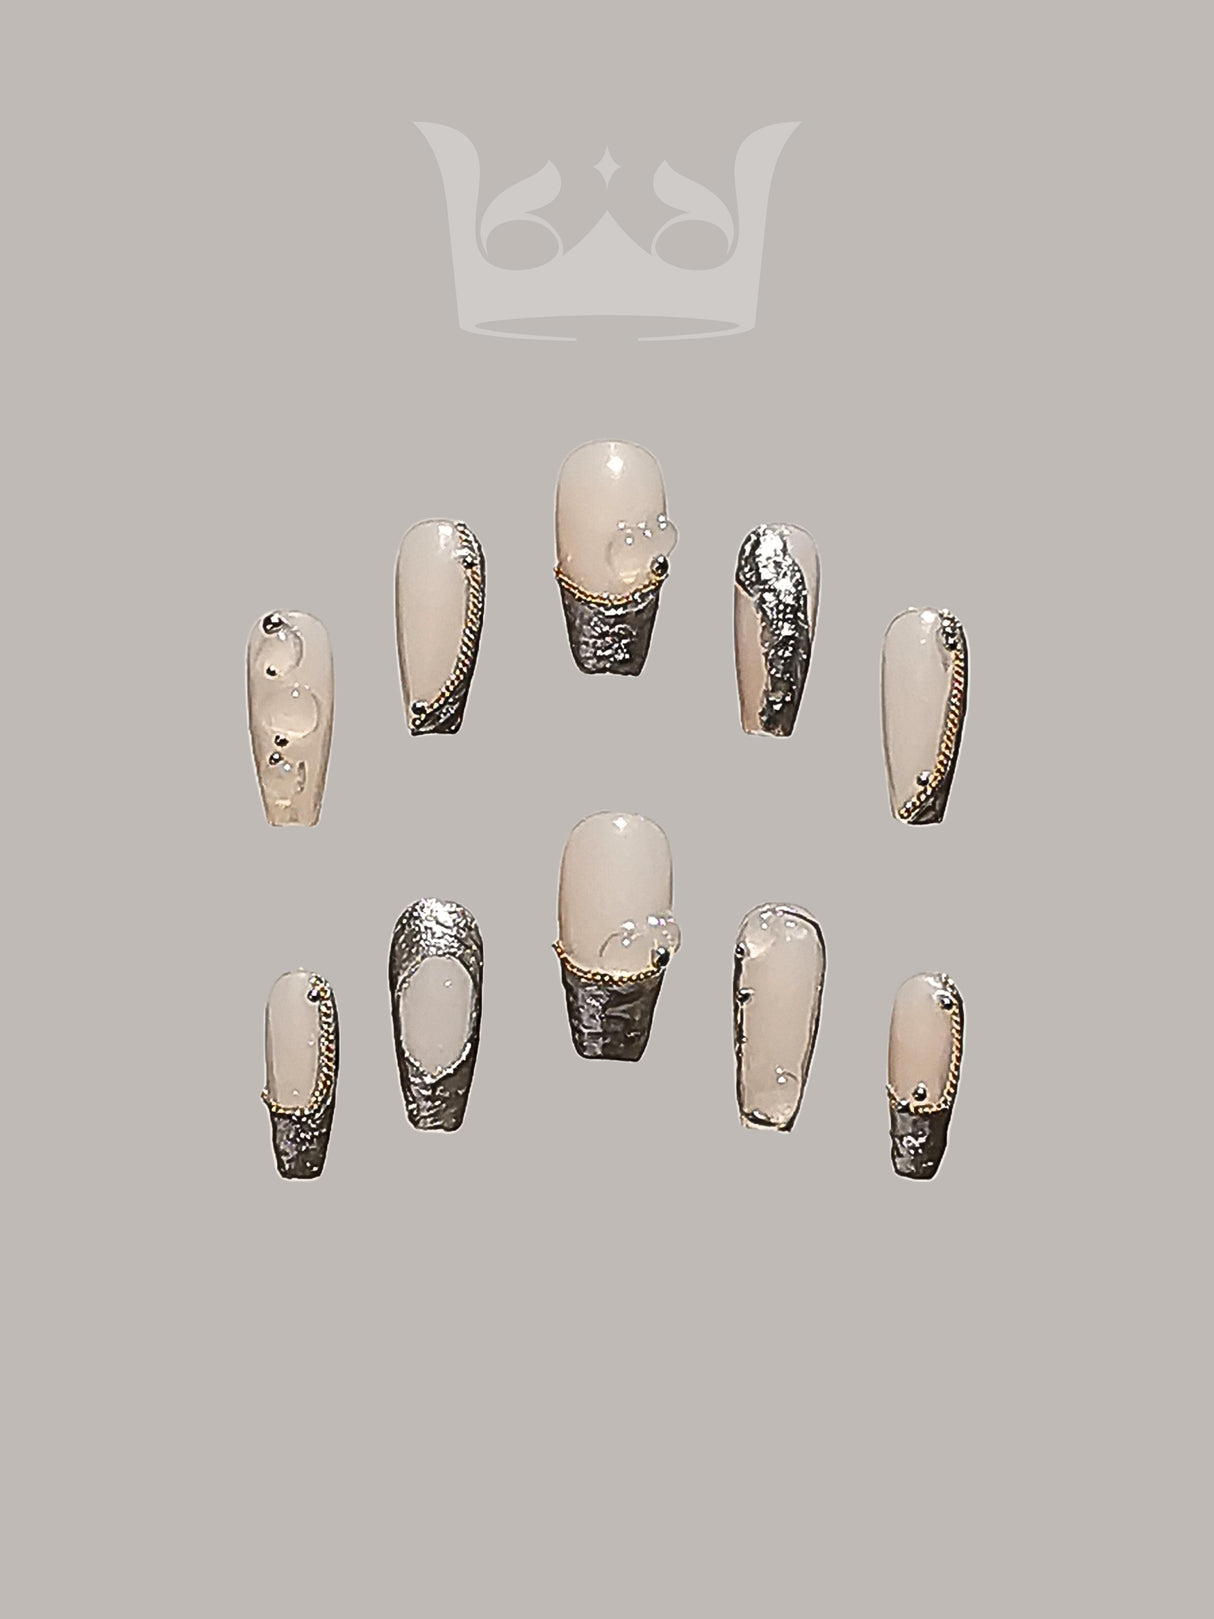 Fashionable and elegant nails with nude/neutral base color and metallic silver accents, designed for special occasions or fashion statements. Trendy and fancy.